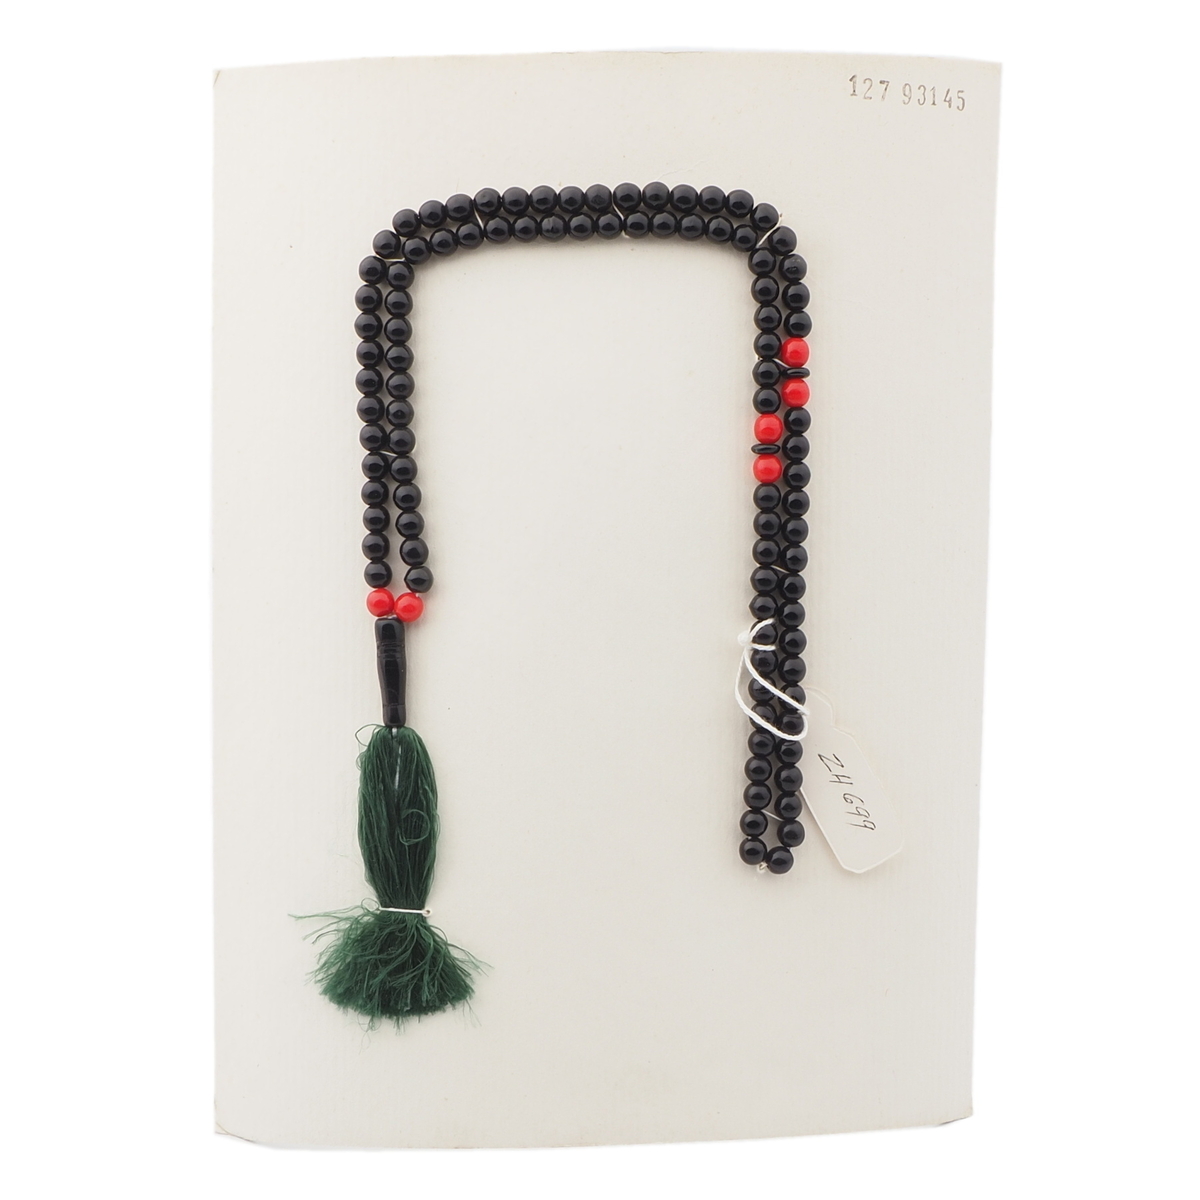 Blue Amber Tasbih With 66 Prayer Prayer Bead Necklace Arab Fashion Jewelry  For Men, Perfect Muslim Gift For Rosary And Islamic Tesbuh Subha From  Somnuns, $16.13 | DHgate.Com